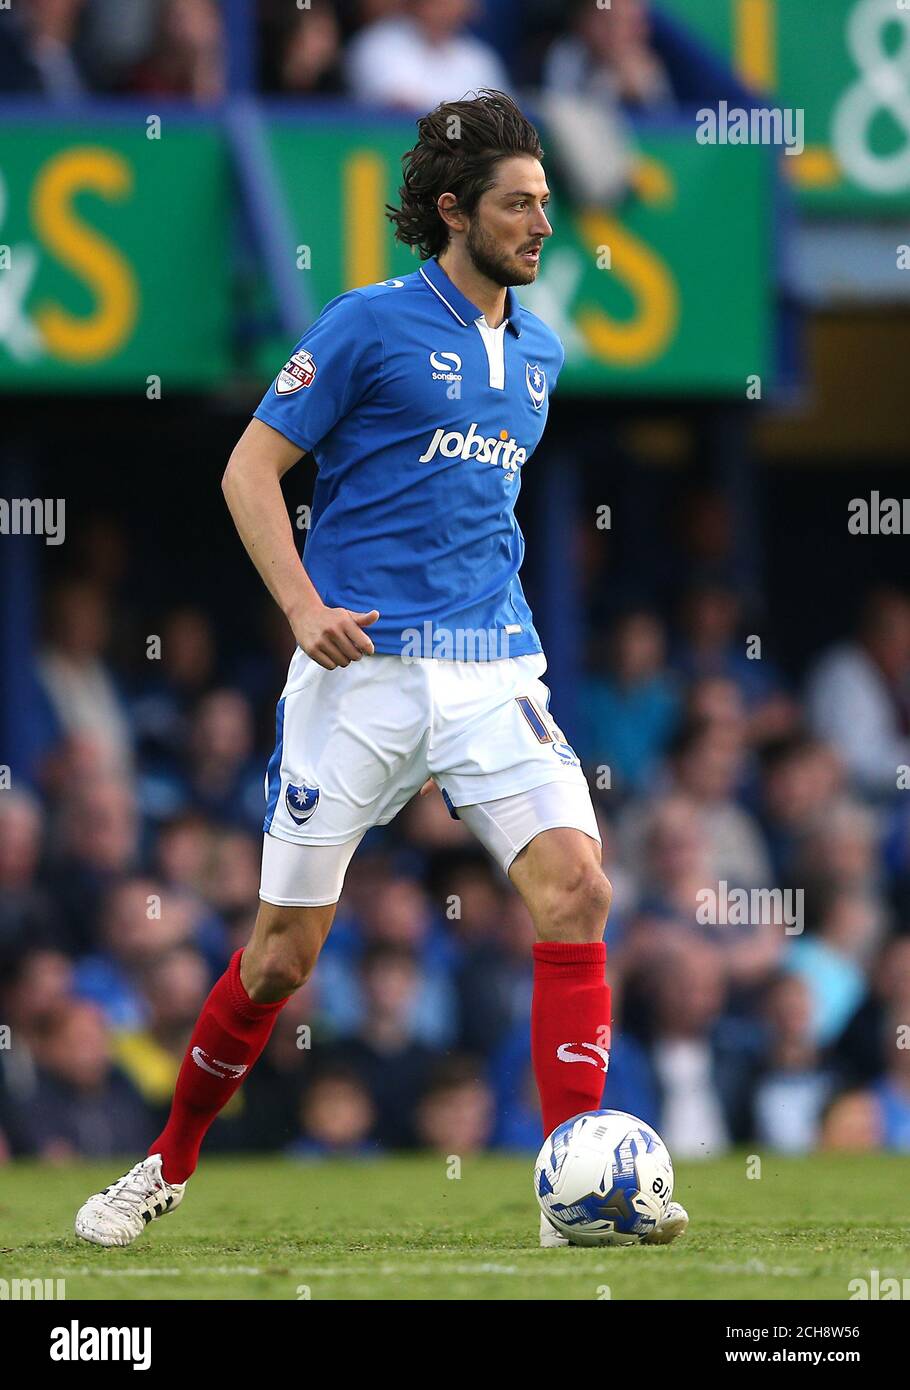 Portsmouth's Christian Burgess during the Sky Bet League Two playoff, first round game at Fratton Park, Portsmouth. PRESS ASSOCIATION Photo. Picture date: Thursday May 12, 2016. See PA story SOCCER Portsmouth. Photo credit should read: David Davies/PA Wire. RESTRICTIONS: No use with unauthorised audio, video, data, fixture lists, club/league logos or 'live' services. Online in-match use limited to 75 images, no video emulation. No use in betting, games or single club/league/player publications. Stock Photo